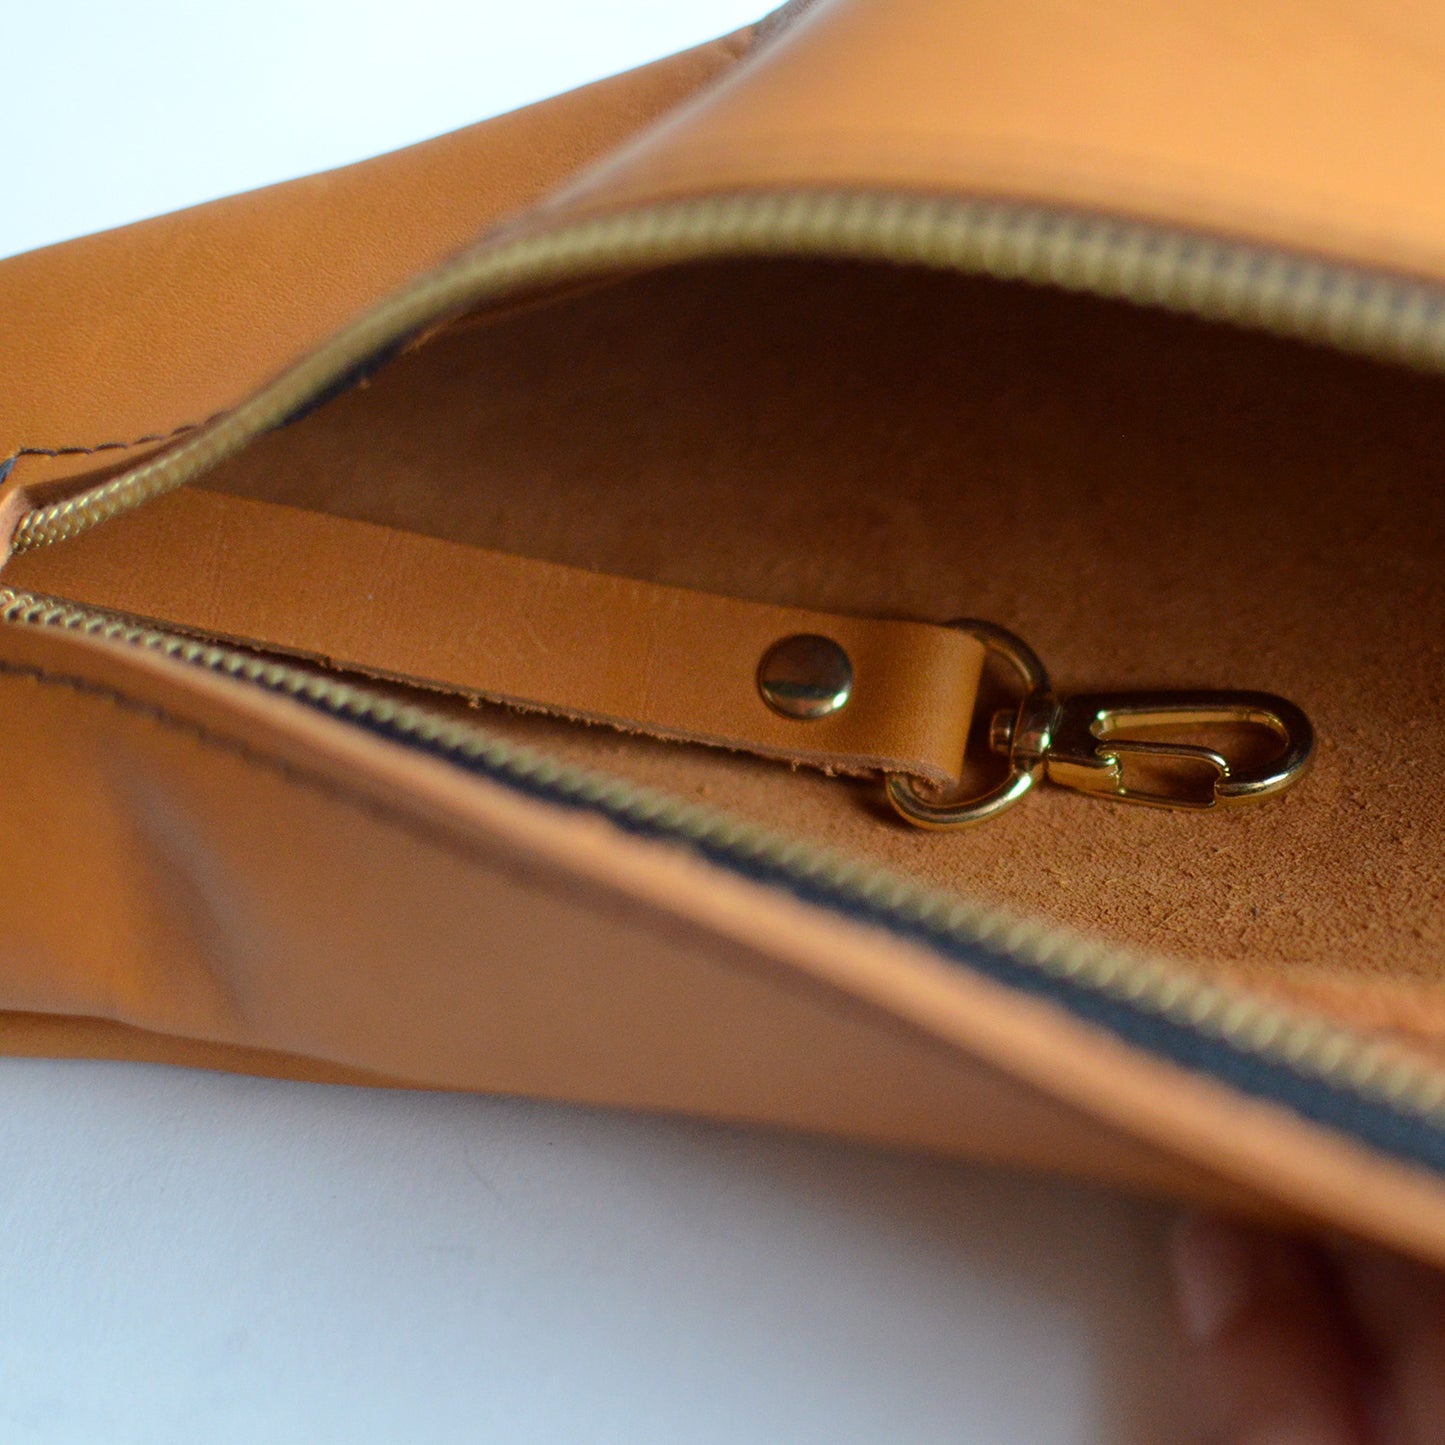 Honey Brown Sling Bag details by Moss Bags